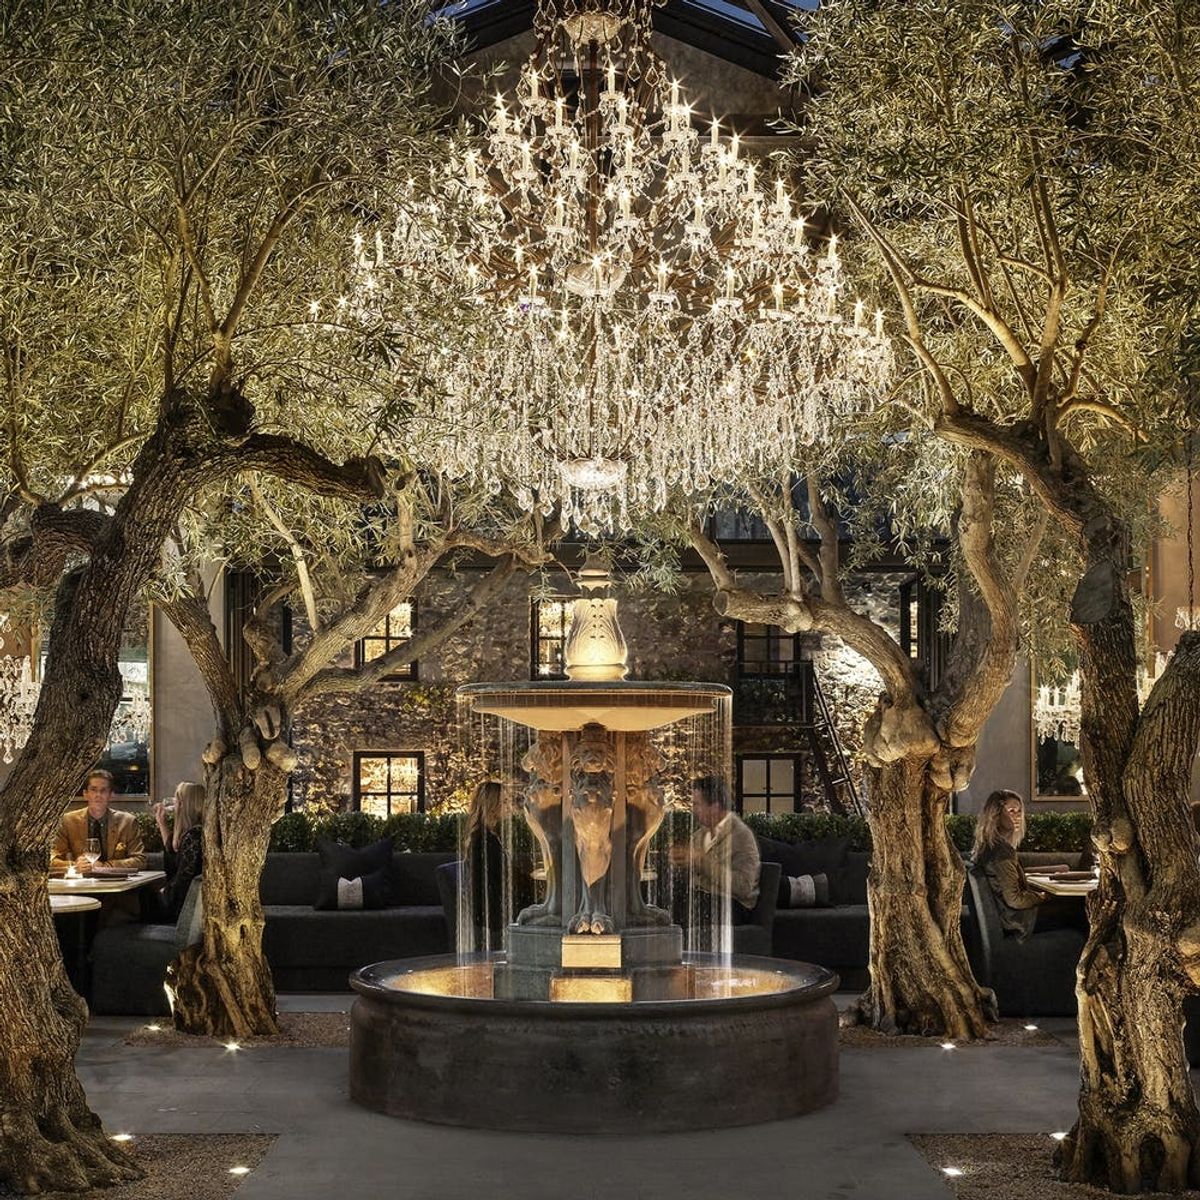 Restoration Hardware Has a Restaurant and It’s Dining Room #Goals